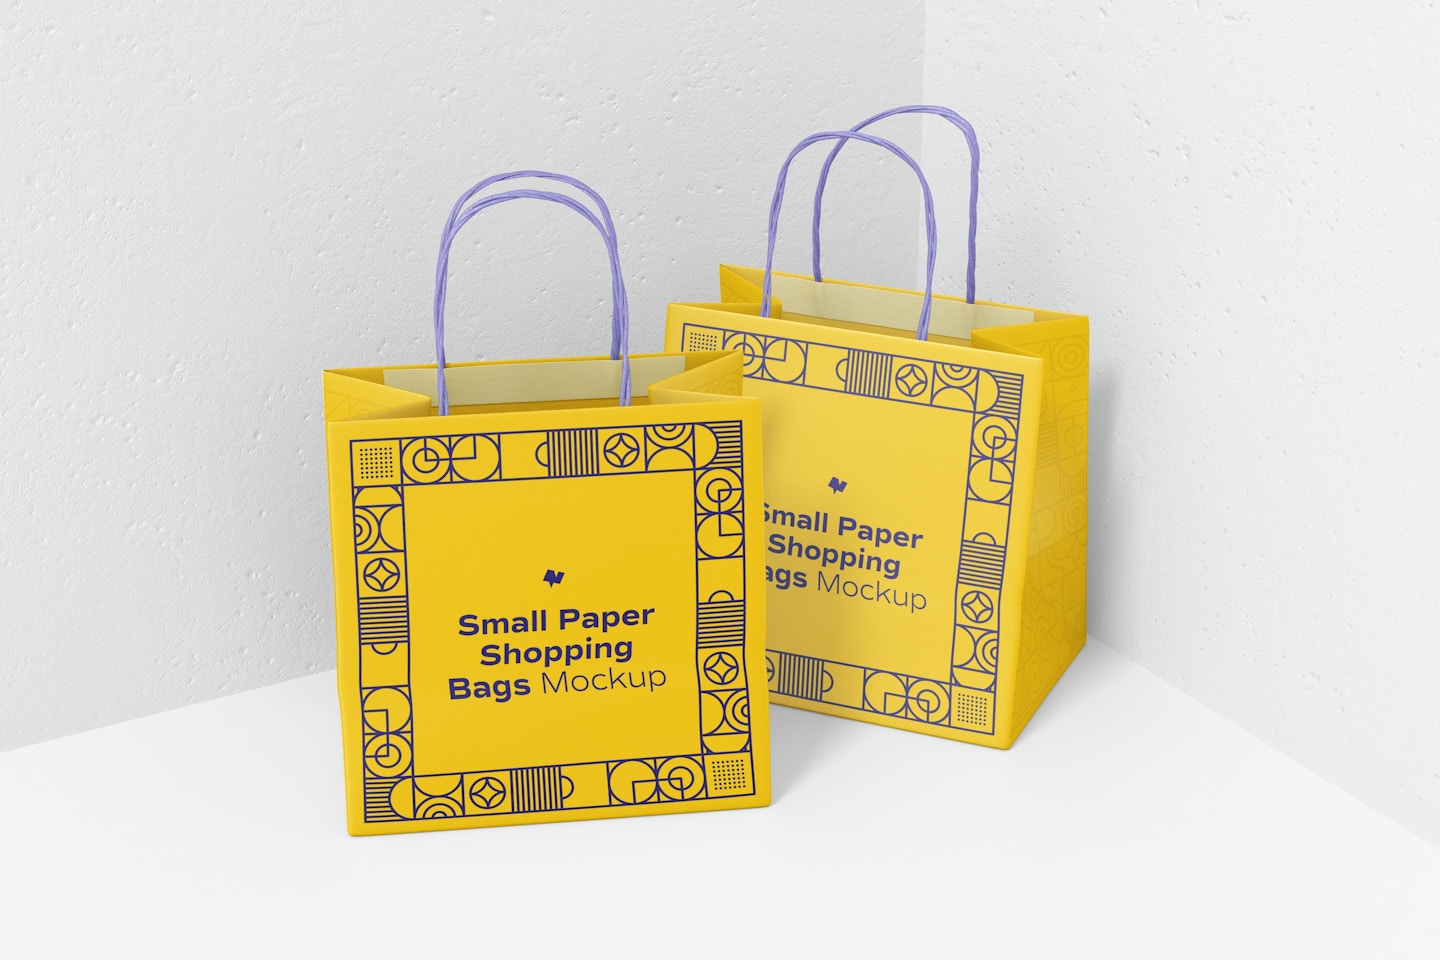 Small Paper Shopping Bags Mockup, Perspective